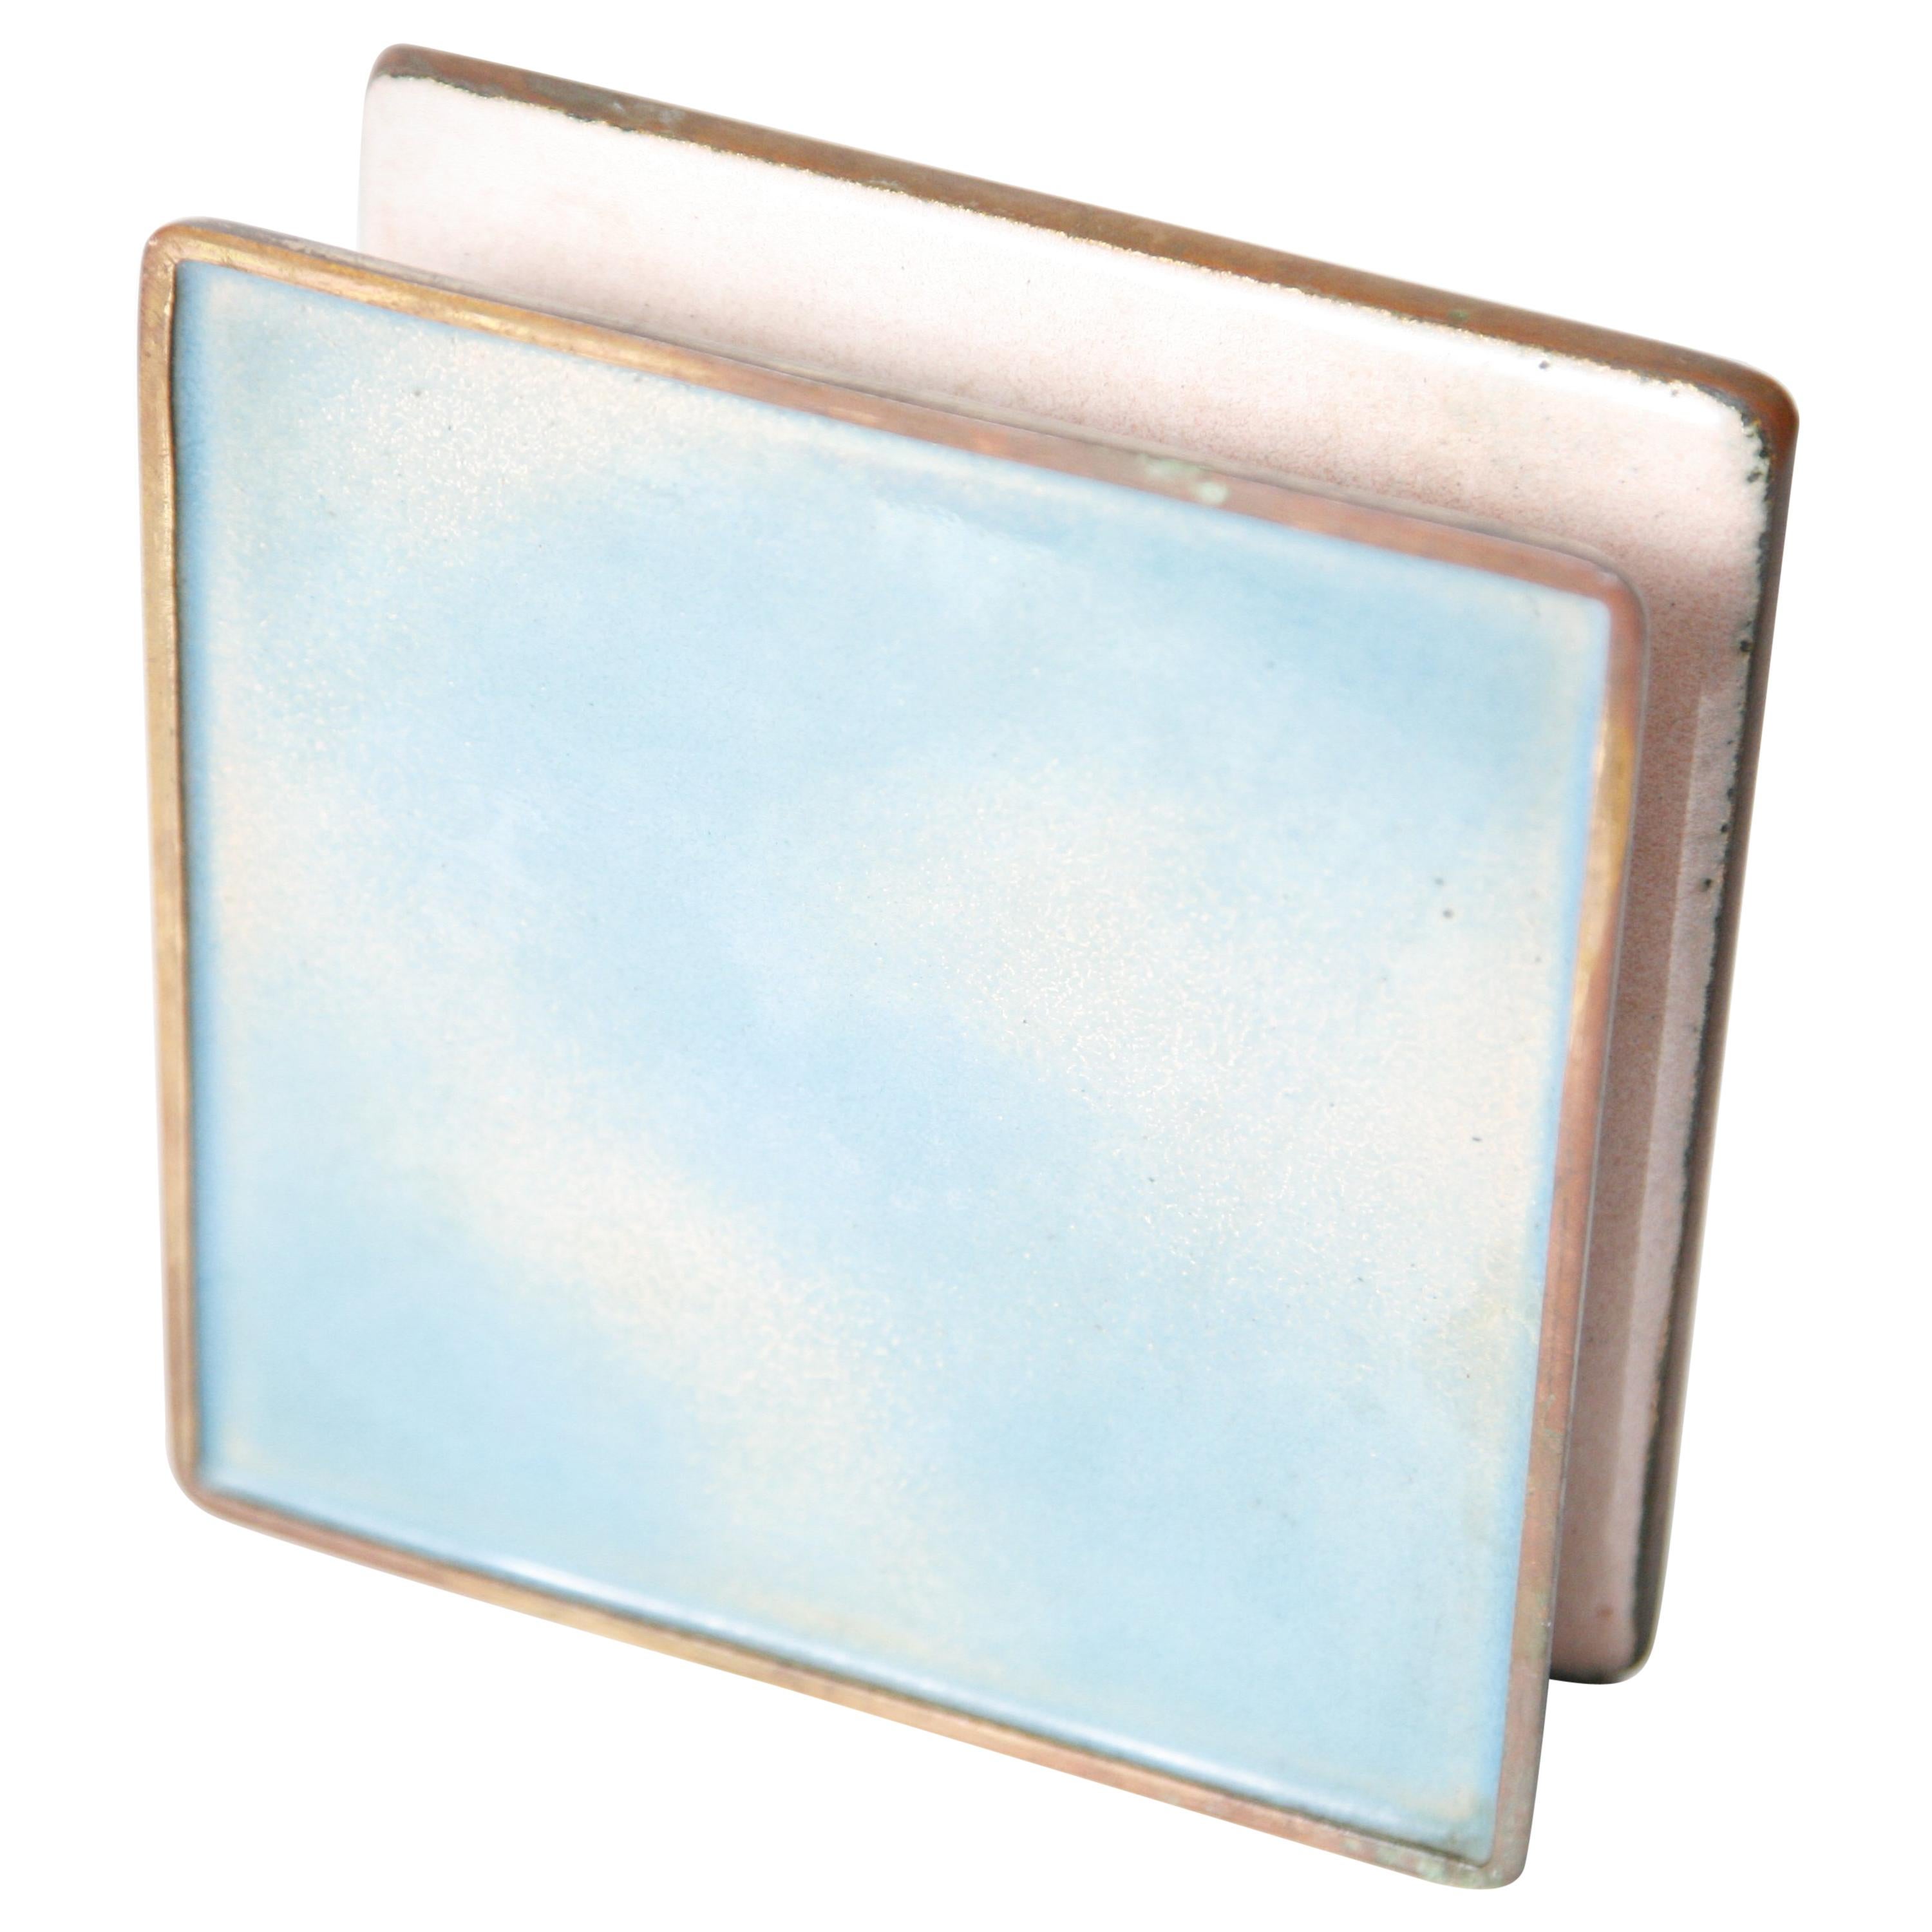 Copper door handle enameled in a turquoise hue by Gio Ponti and Paolo De Poli.